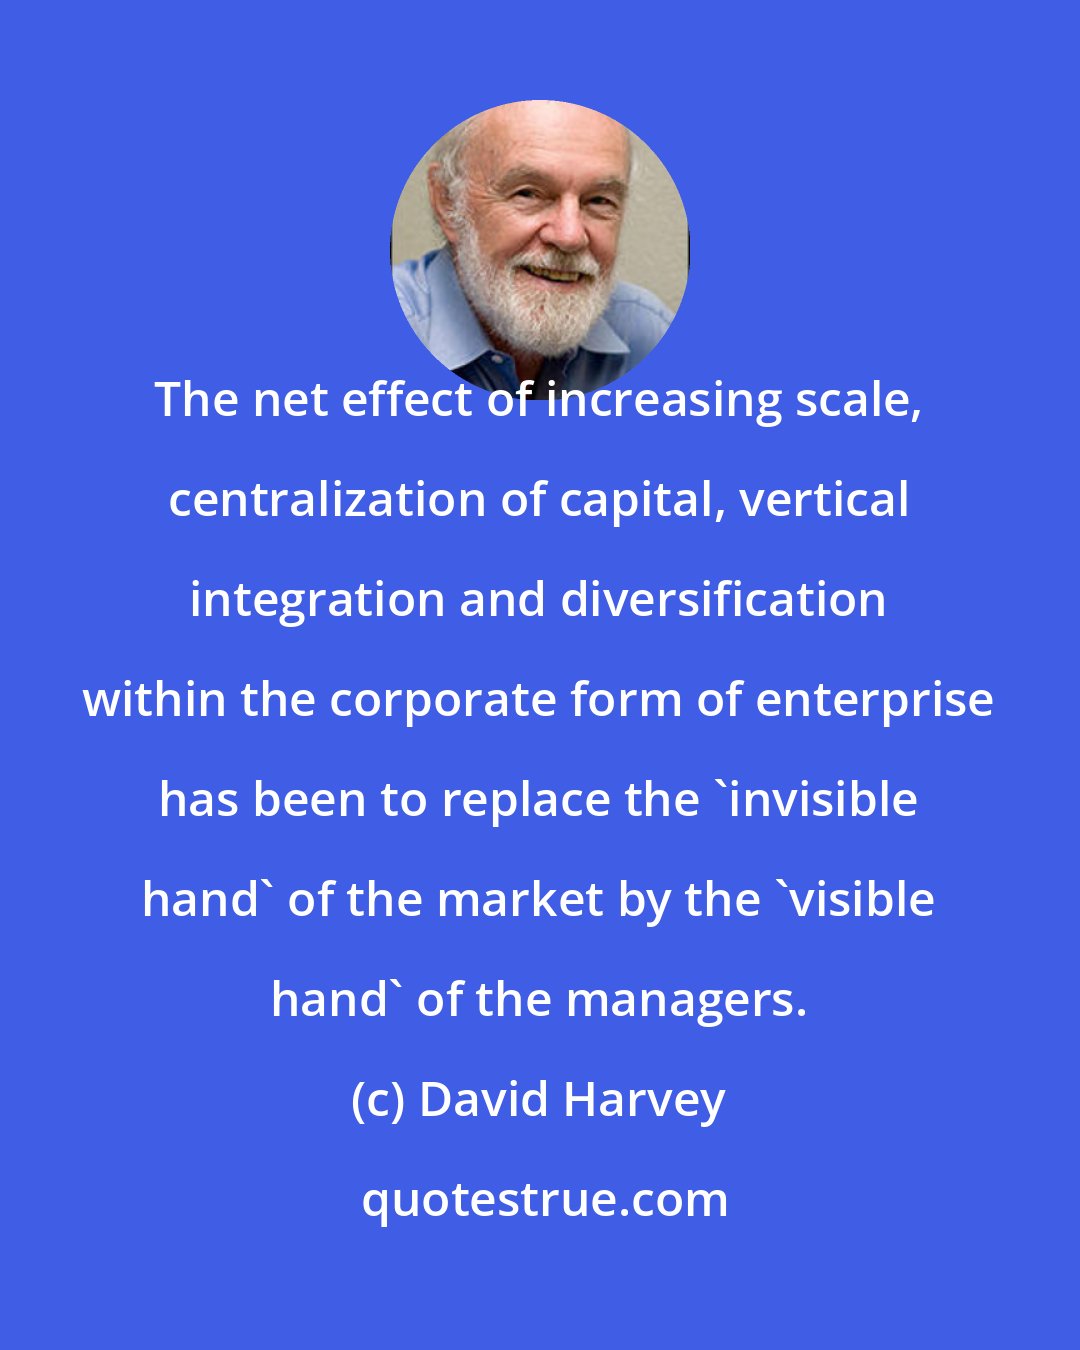 David Harvey: The net effect of increasing scale, centralization of capital, vertical integration and diversification within the corporate form of enterprise has been to replace the 'invisible hand' of the market by the 'visible hand' of the managers.